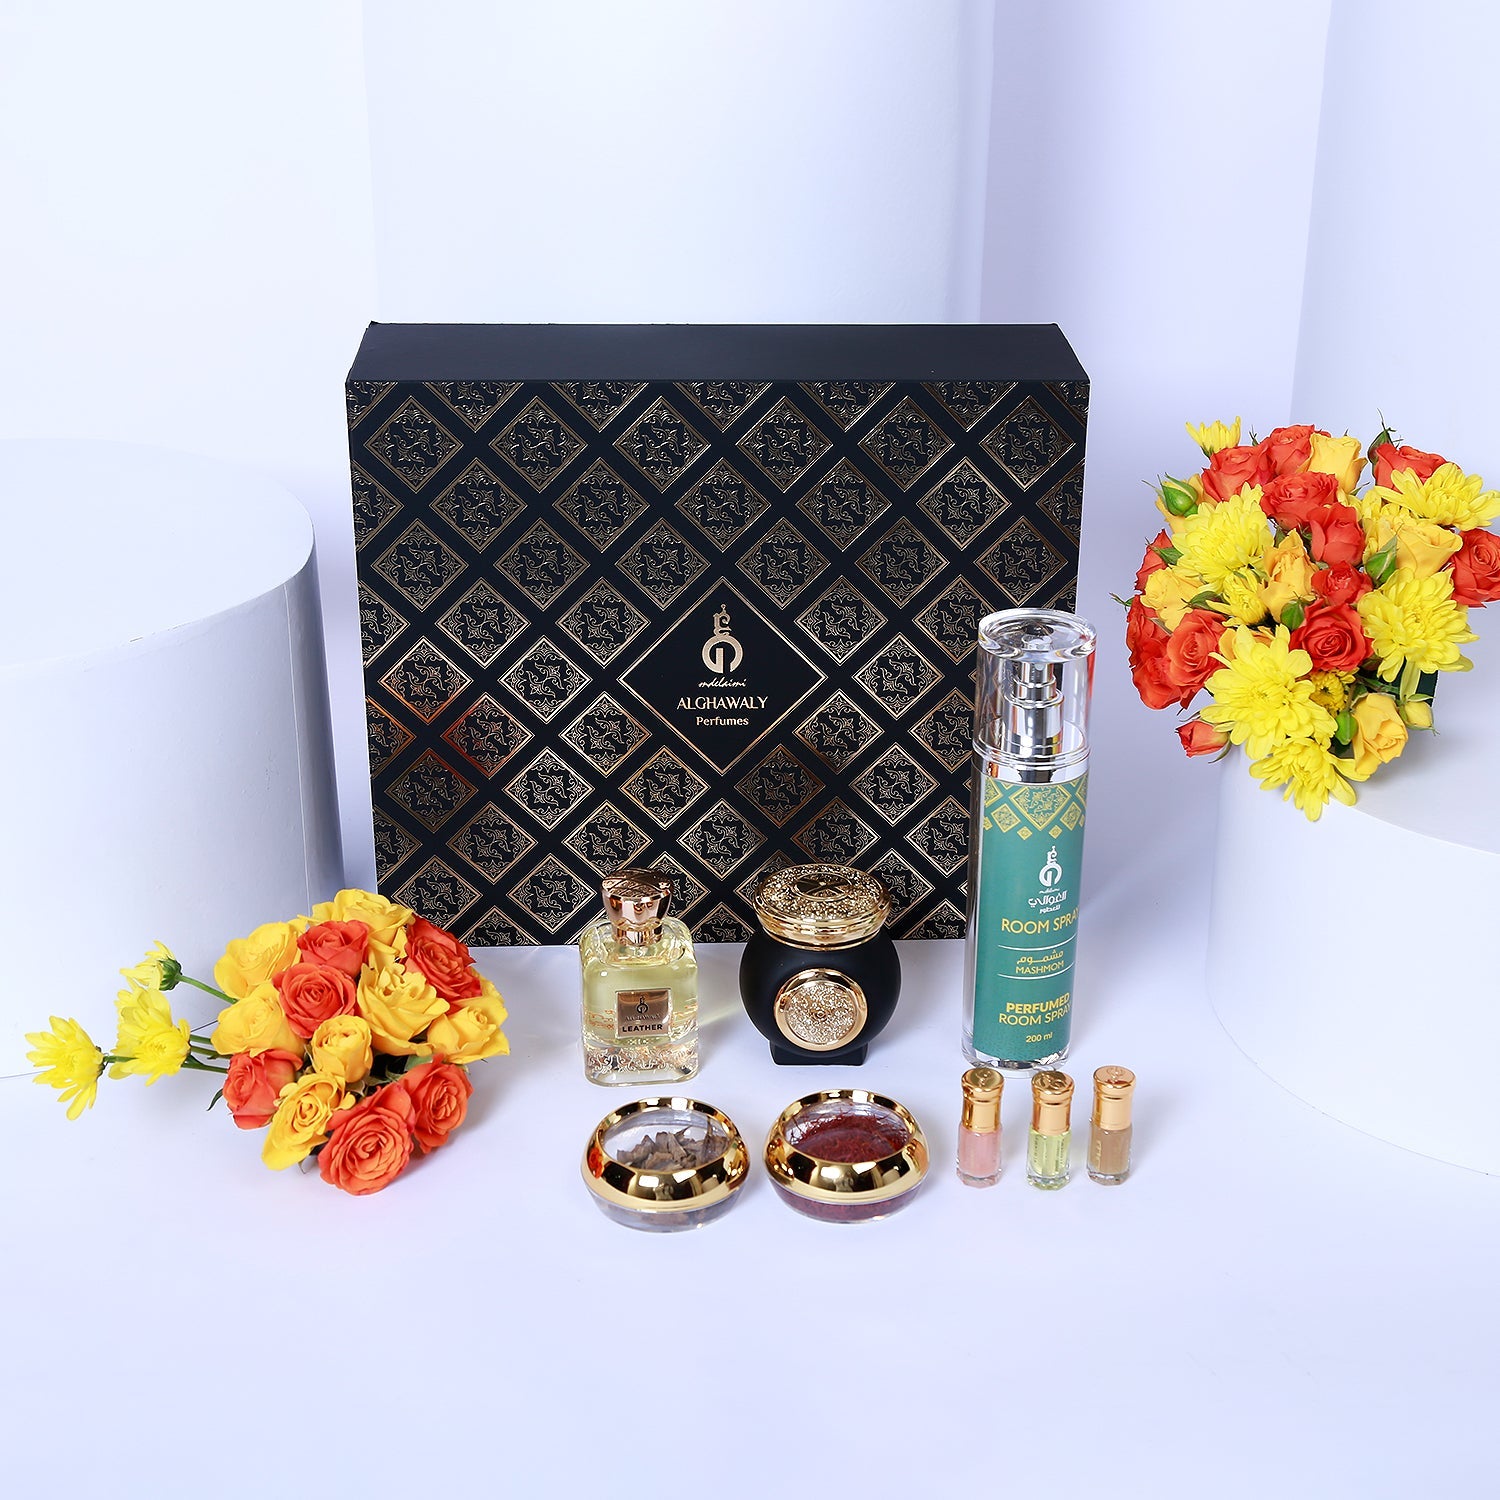 Alghawaly Fragrance Set with Flowers